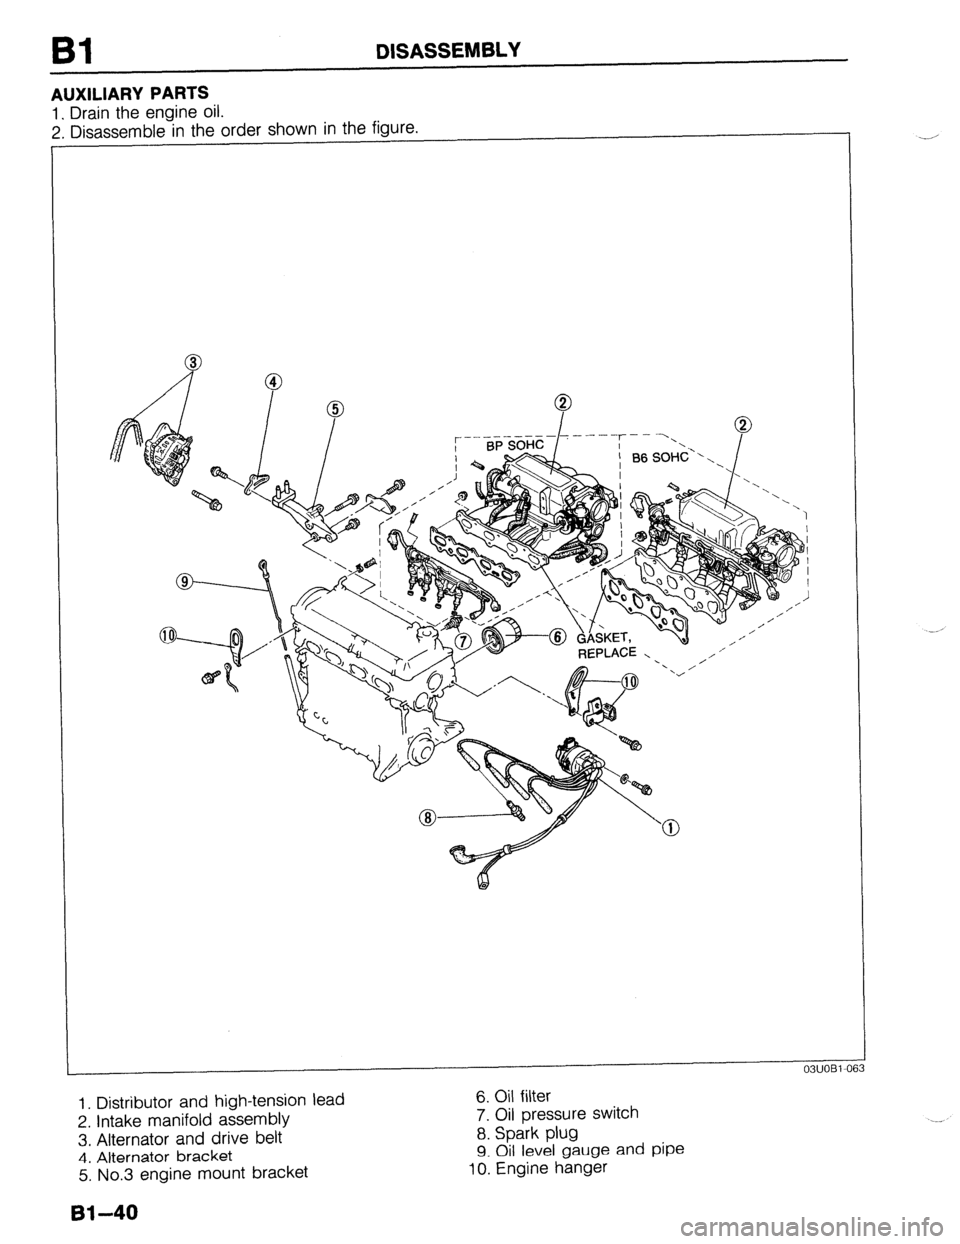 MAZDA PROTEGE 1992  Workshop Manual Bl DISASSEMBLY 
AUXILIARY PARTS 
1. Drain the engine oil. 
2. Disassemble in the order shown in the figure. 
- REPLACE  - ’  ,/ I’ 
 
1. Distributor and high-tension lead 
2. Intake manifold assem